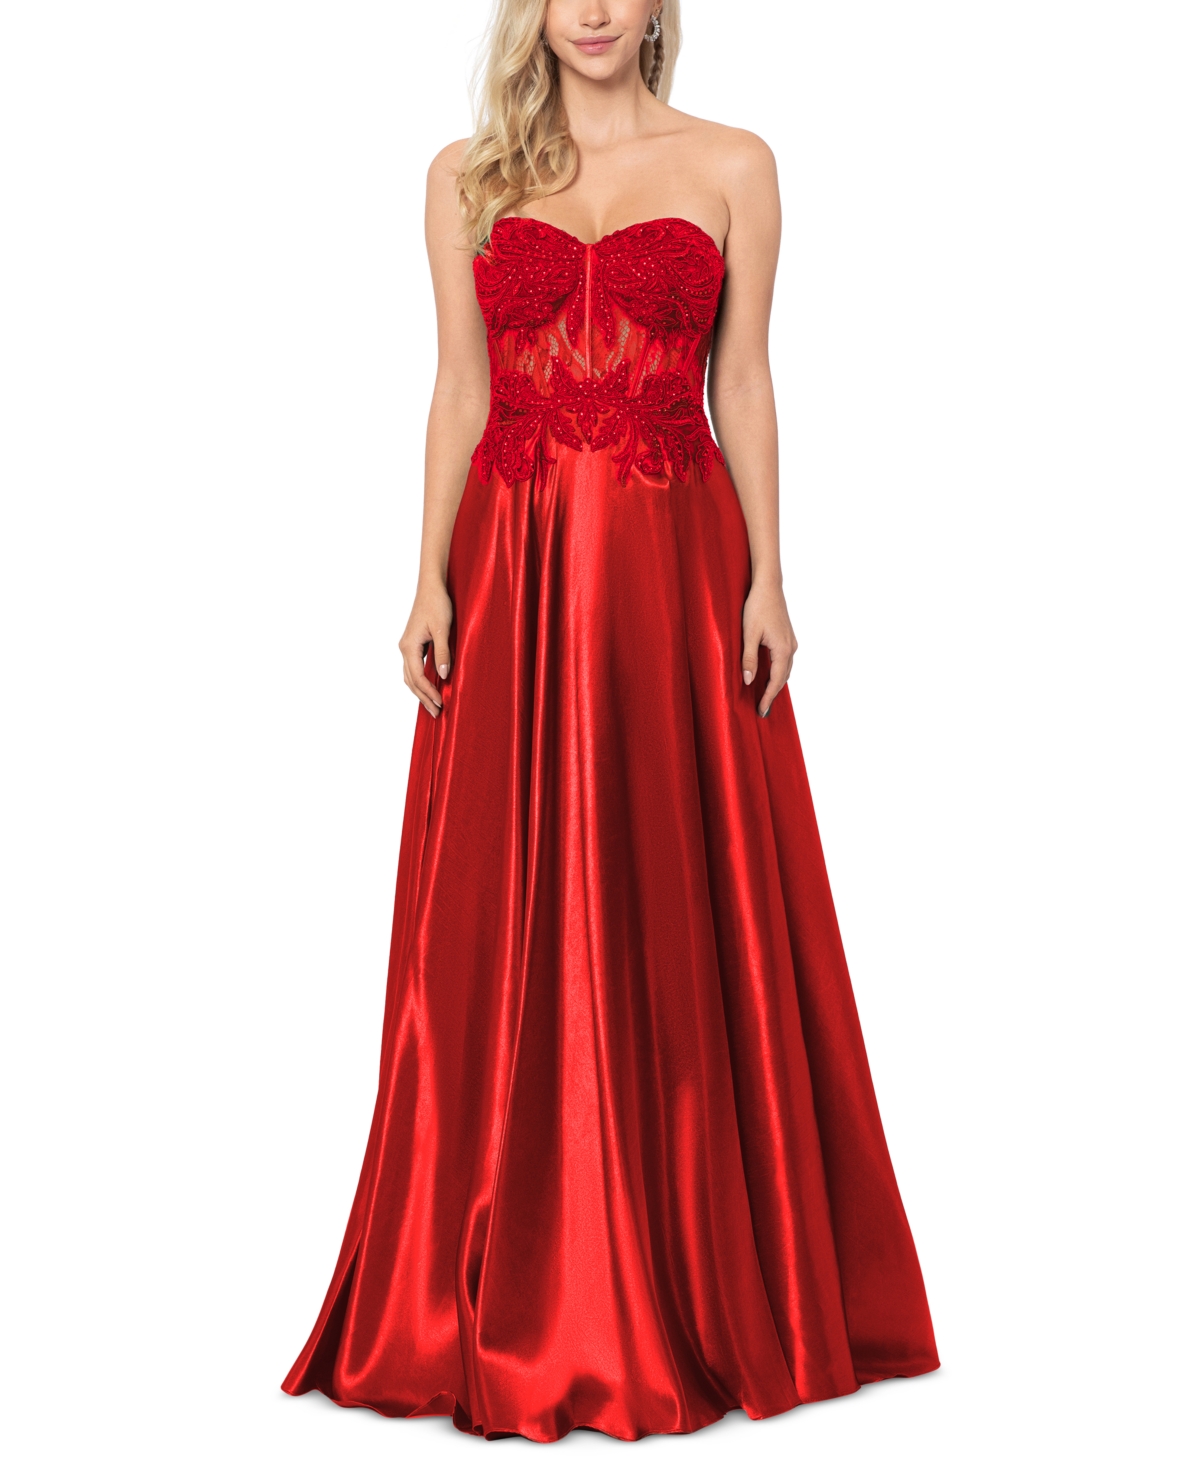 Blondie Nites Juniors' Illusion Applique Charmeuse Gown, Created For Macy's In Red